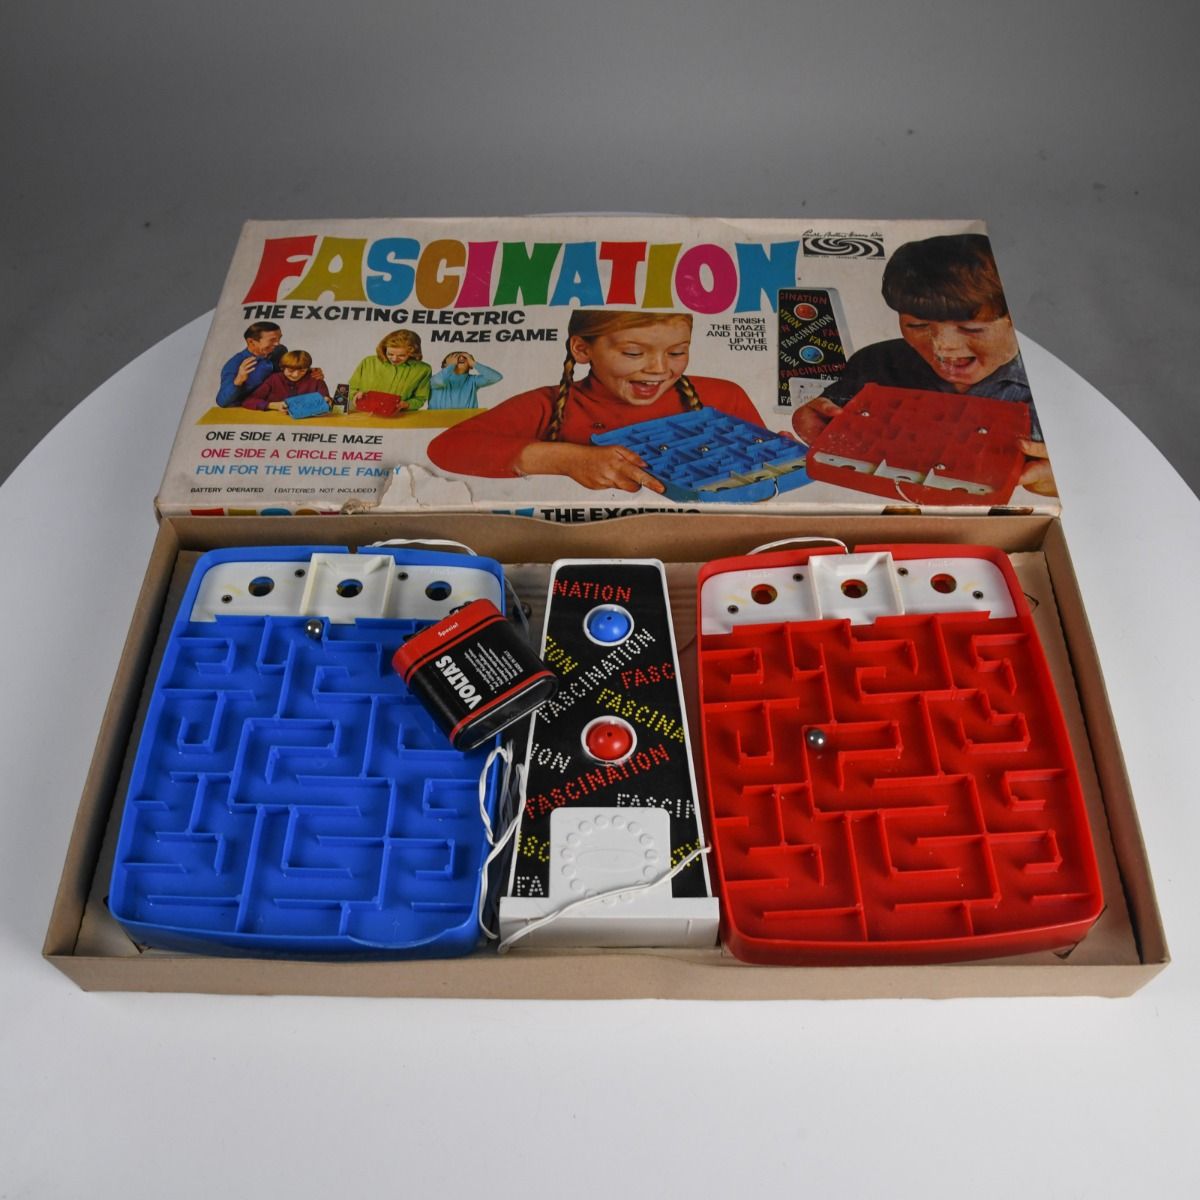 'Fascination - The Exciting Electric Maze Game' 1968 Board Game